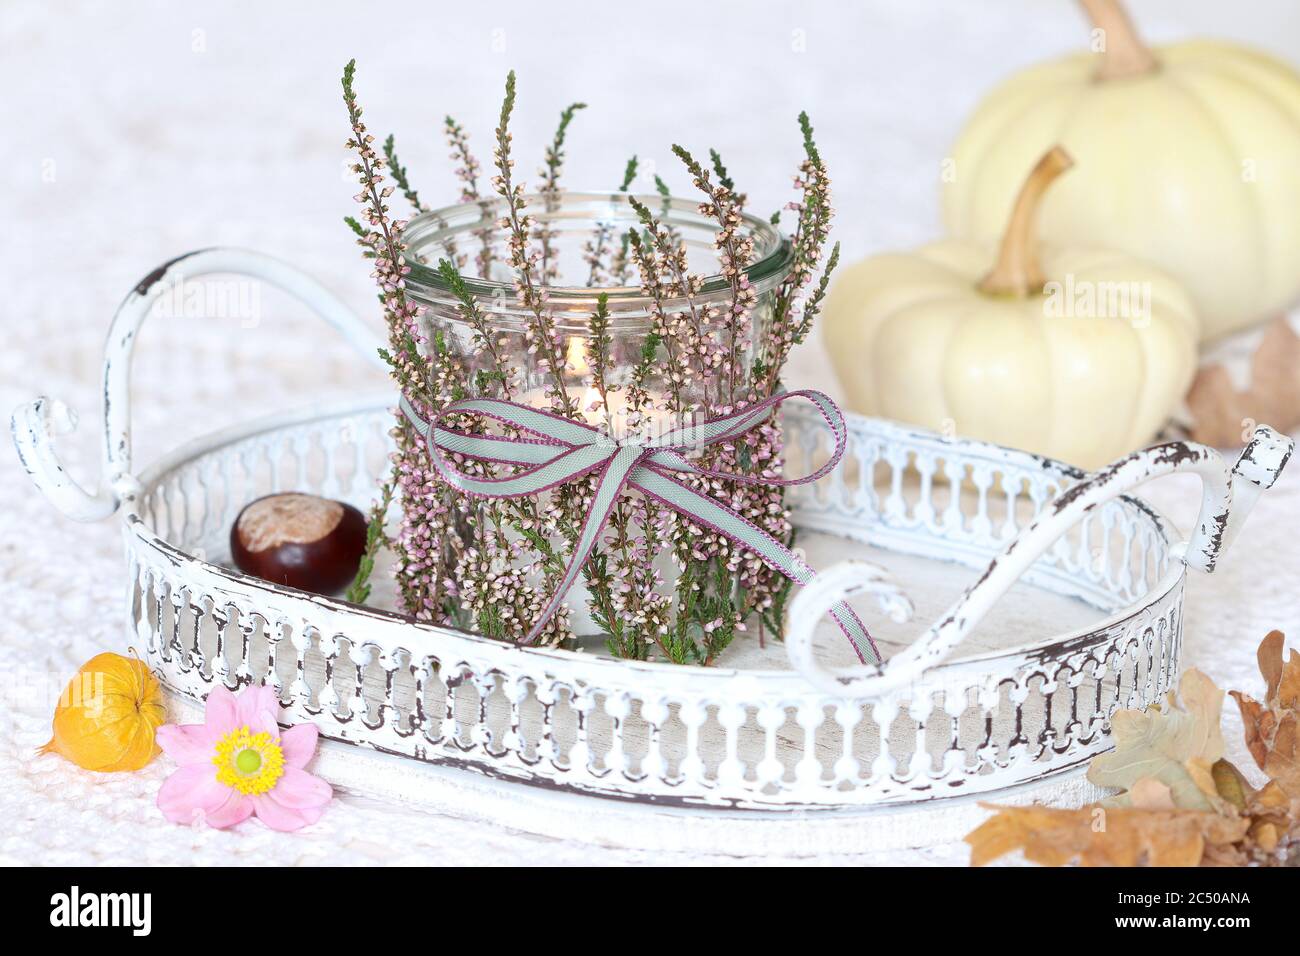 table lantern decorated with heather flowers as romantic autumn decoration Stock Photo